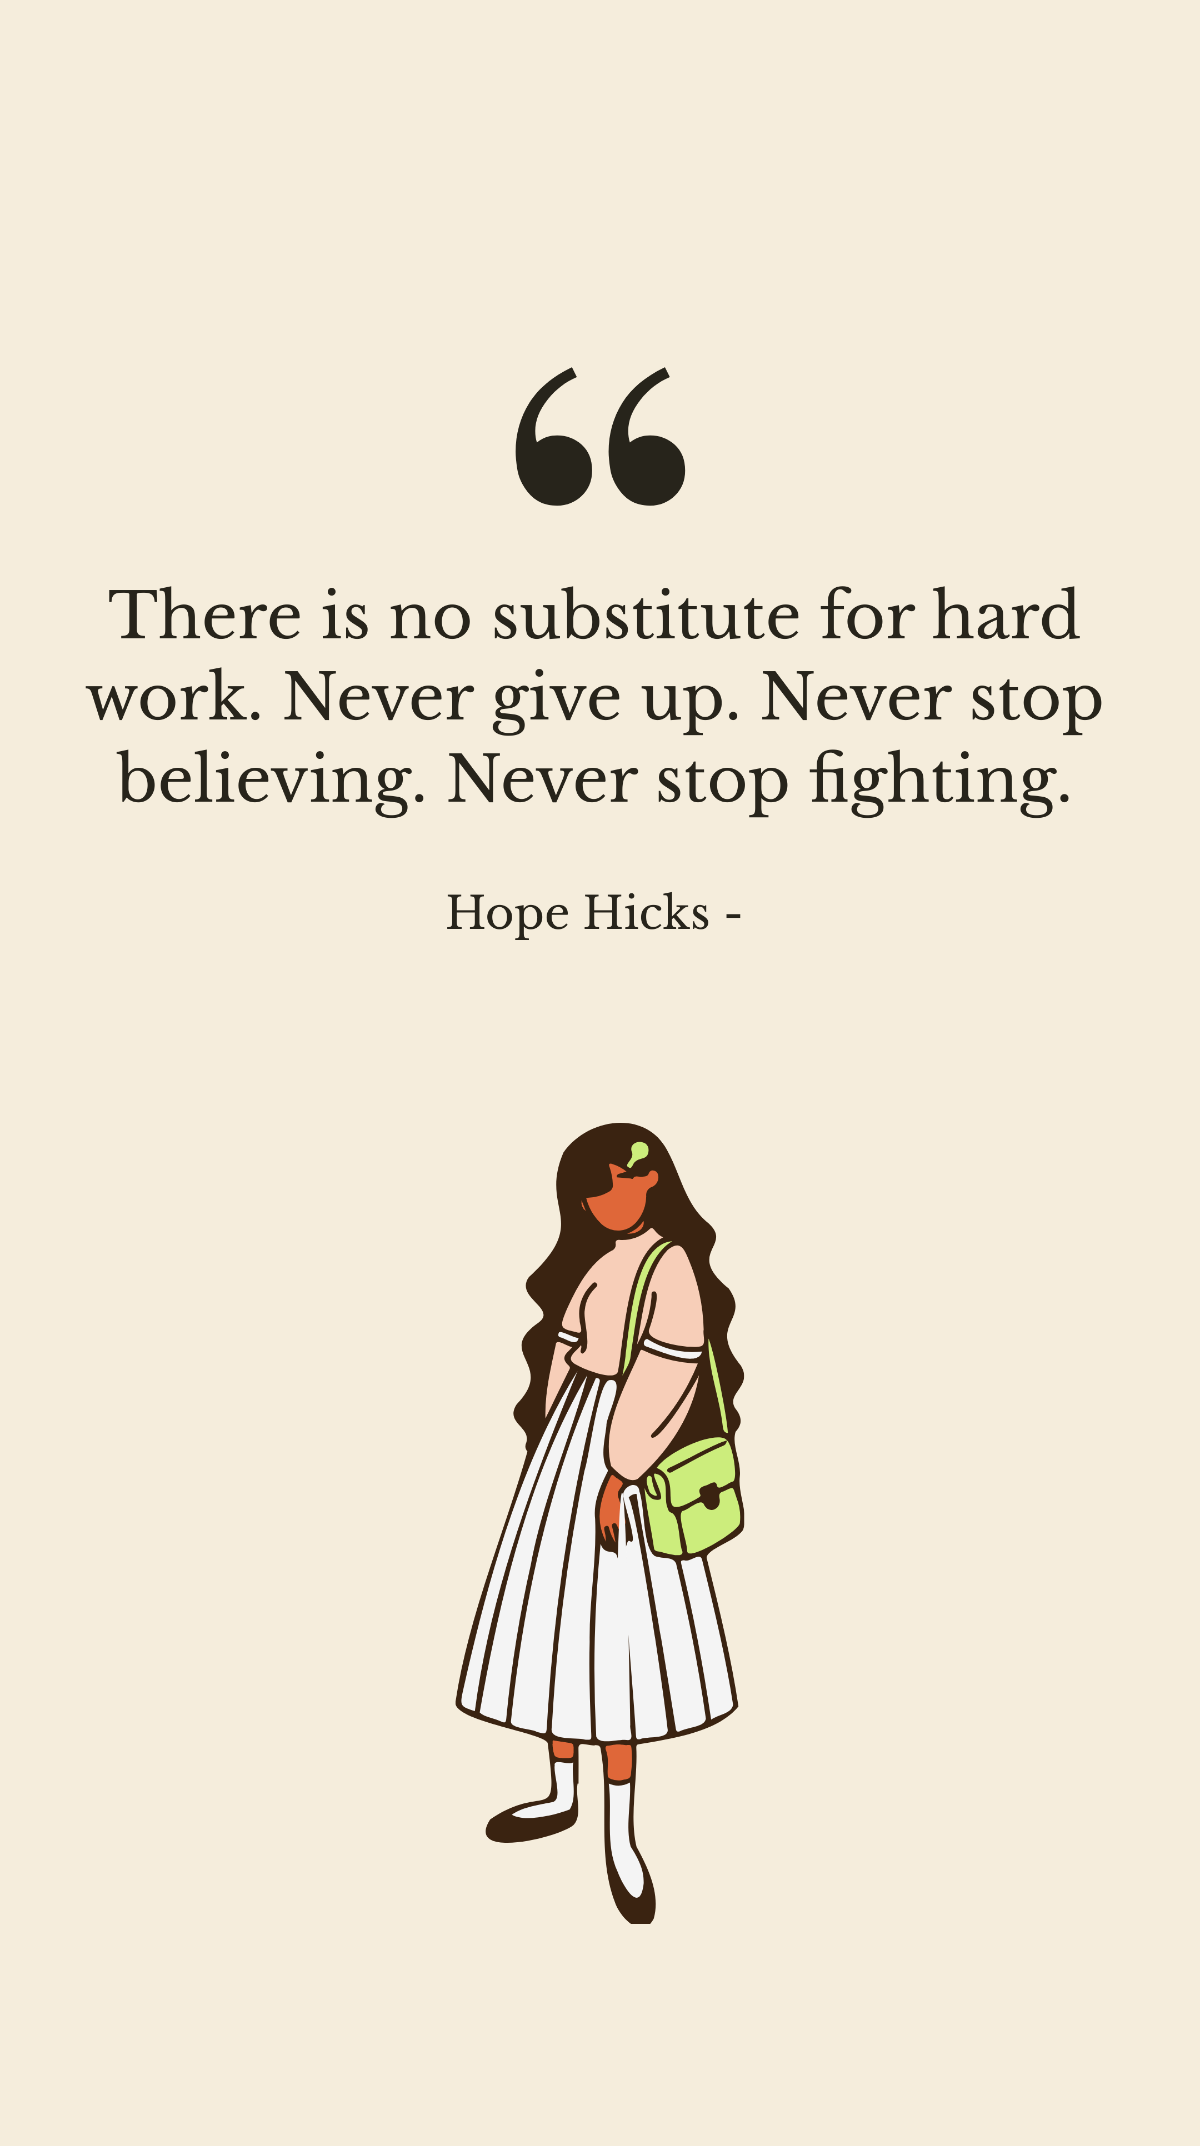 Hope Hicks - There is no substitute for hard work. Never give up. Never stop believing. Never stop fighting.